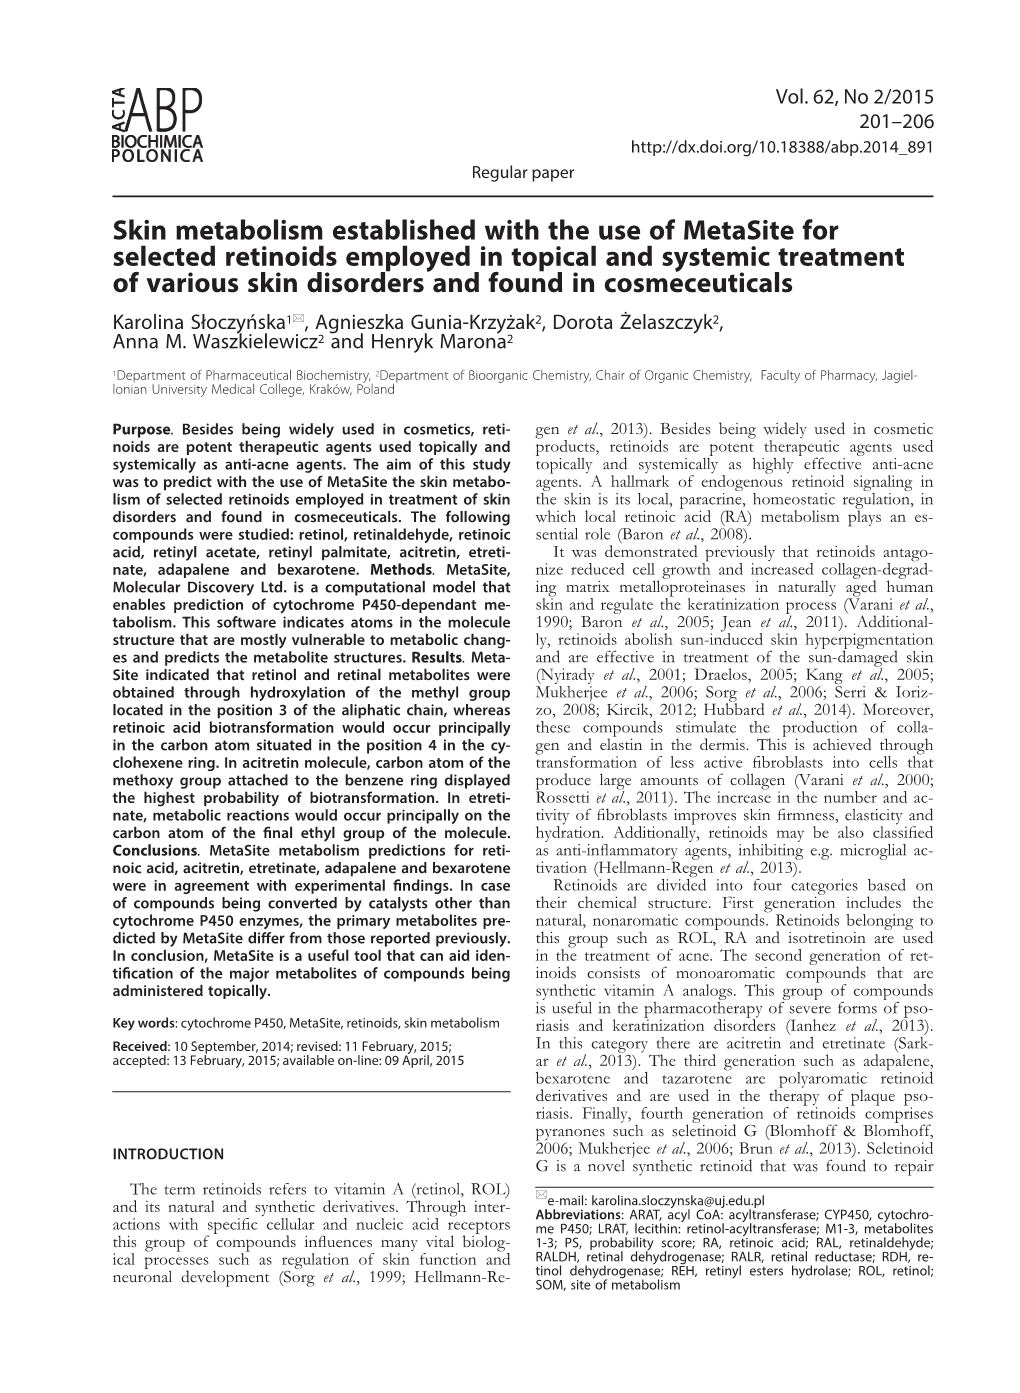 Skin Metabolism Established with the Use of Metasite for Selected